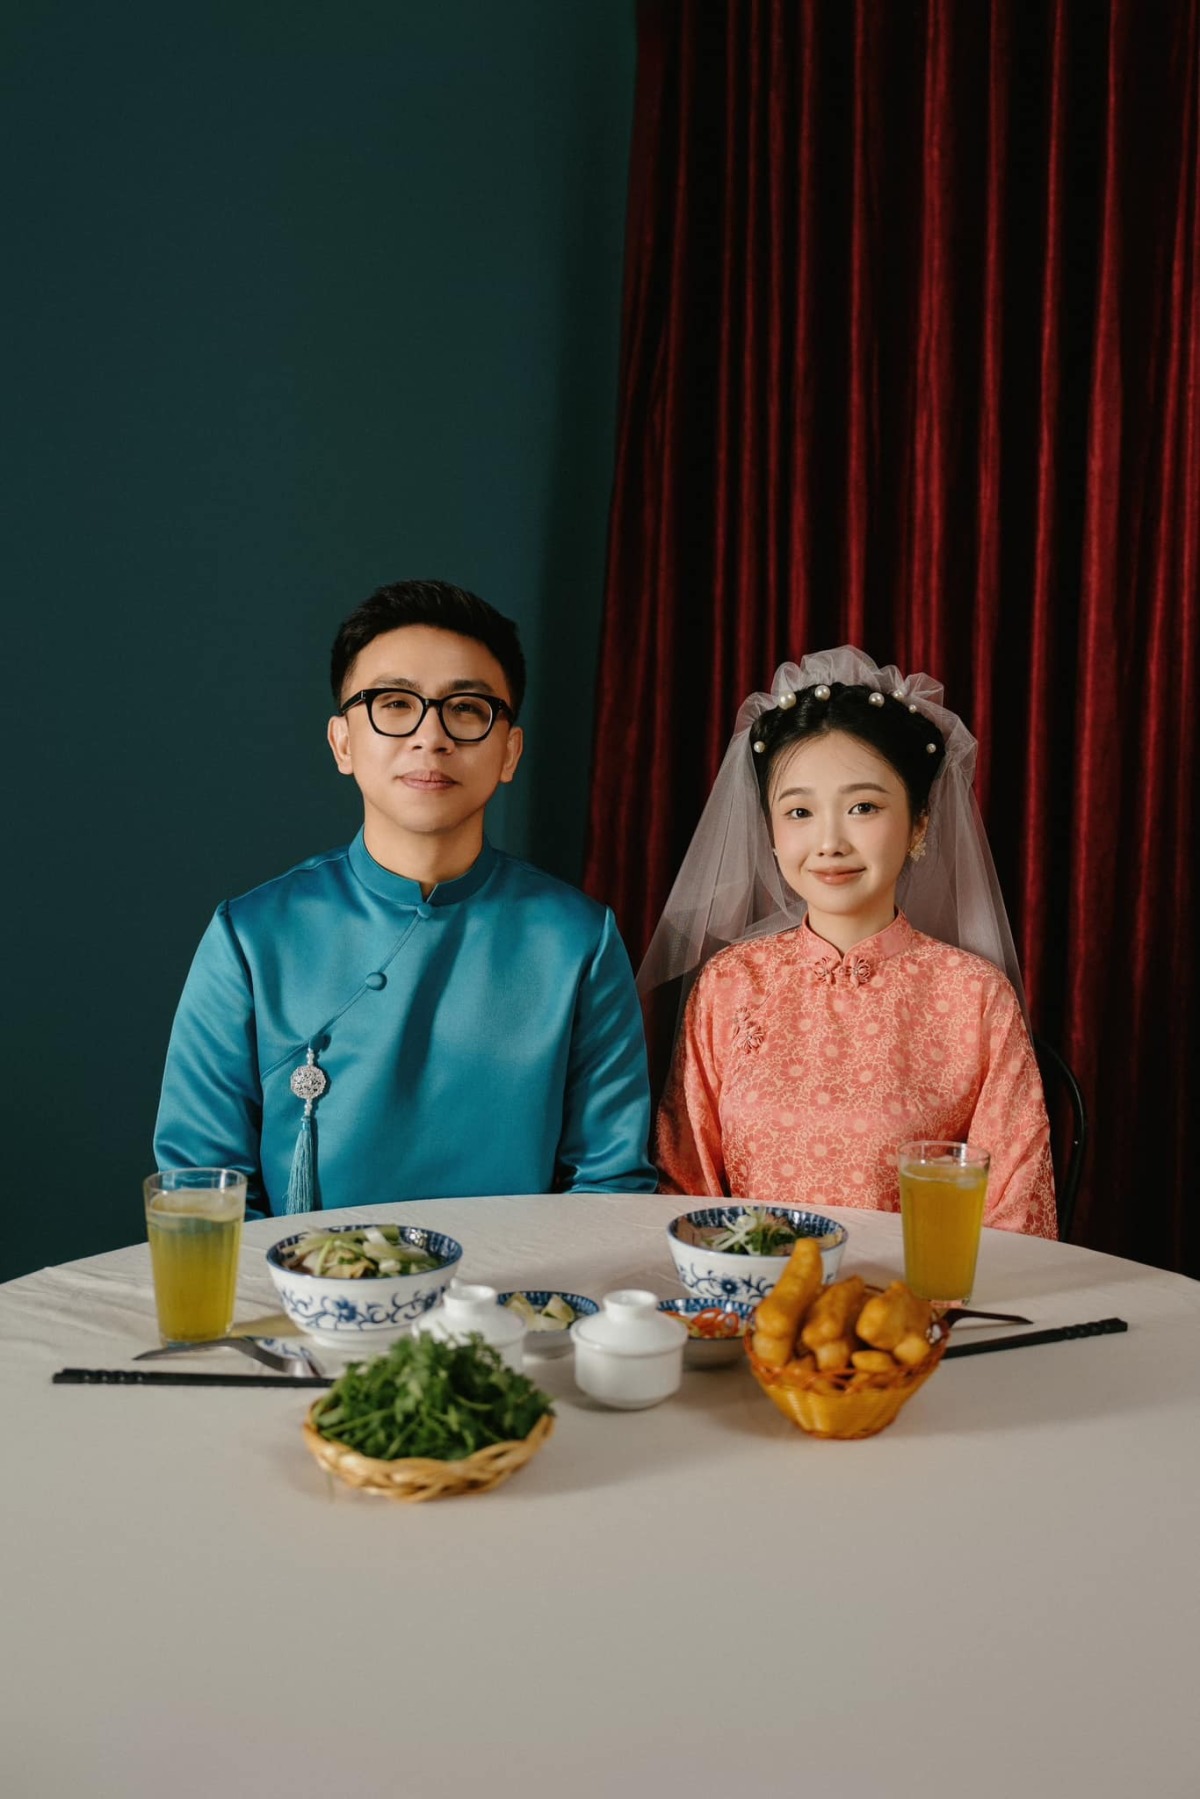 Pho brand heir introduces iconic noodle soup to wedding photoshoot